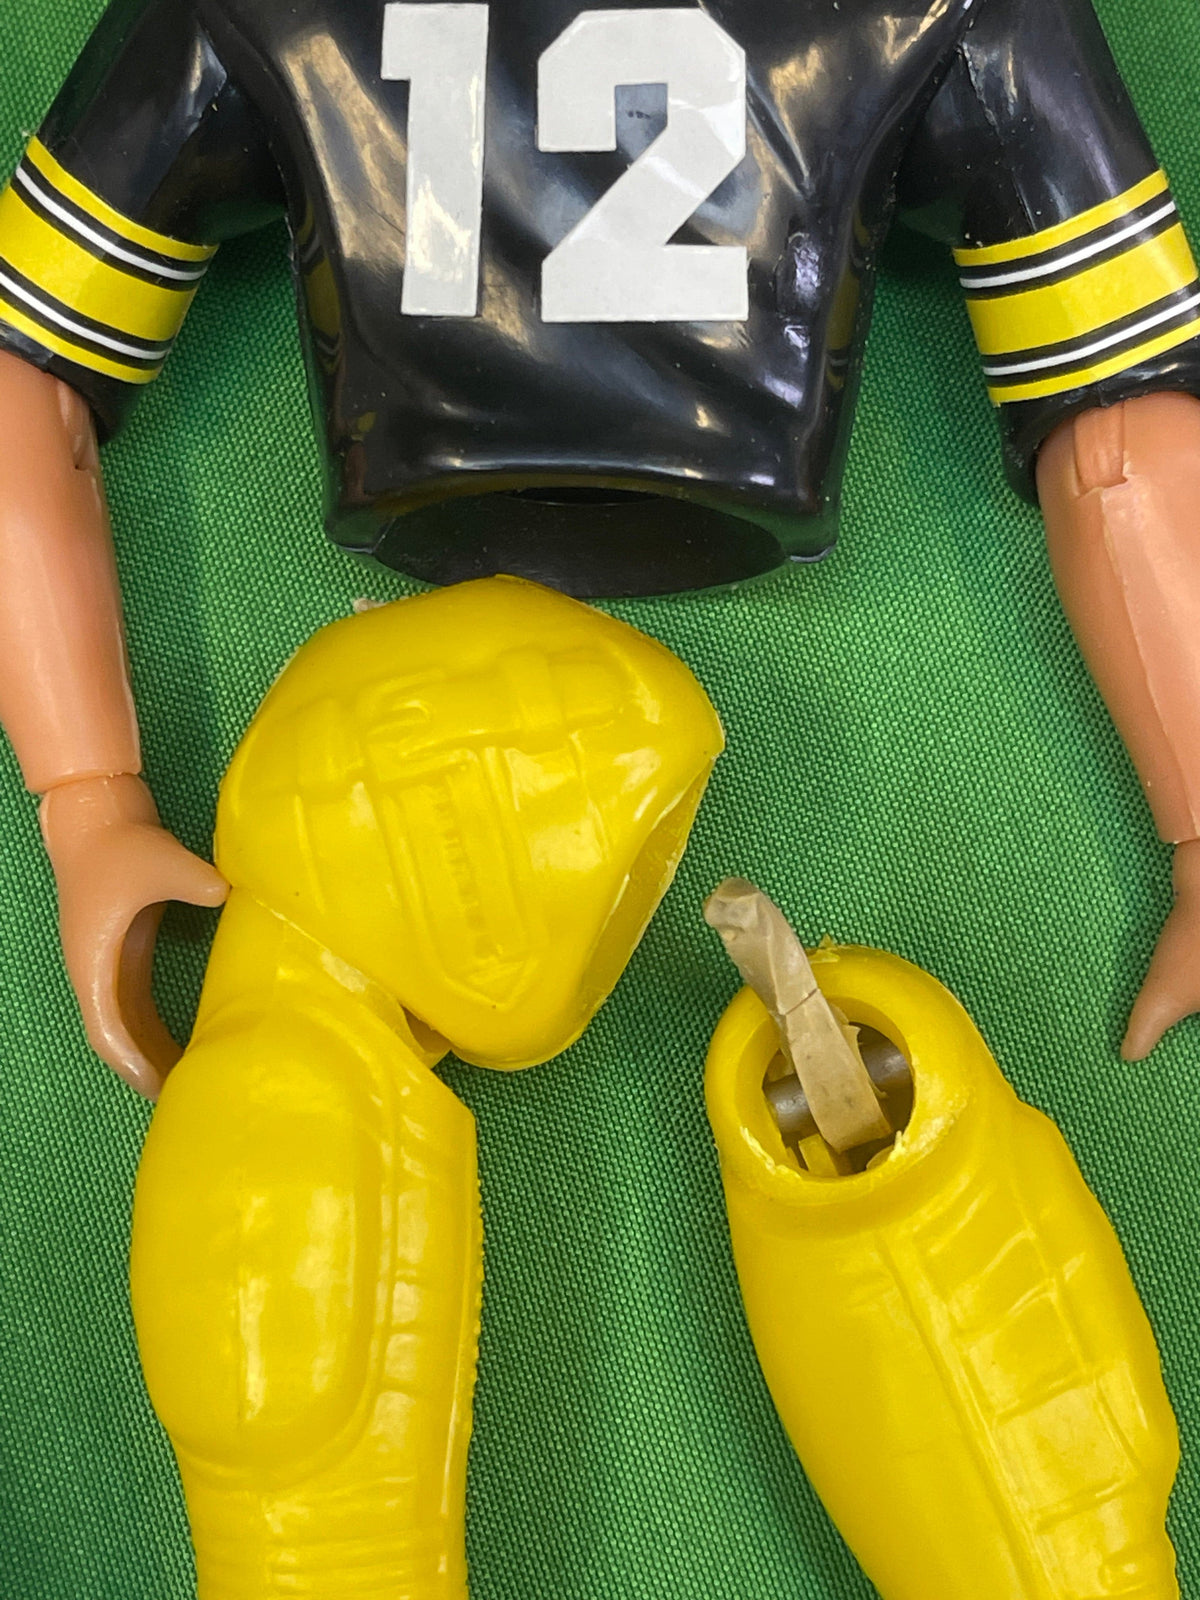 NFL Pittsburgh Steelers Vintage 1977 Terry Bradshaw Action Team Mate w/Box